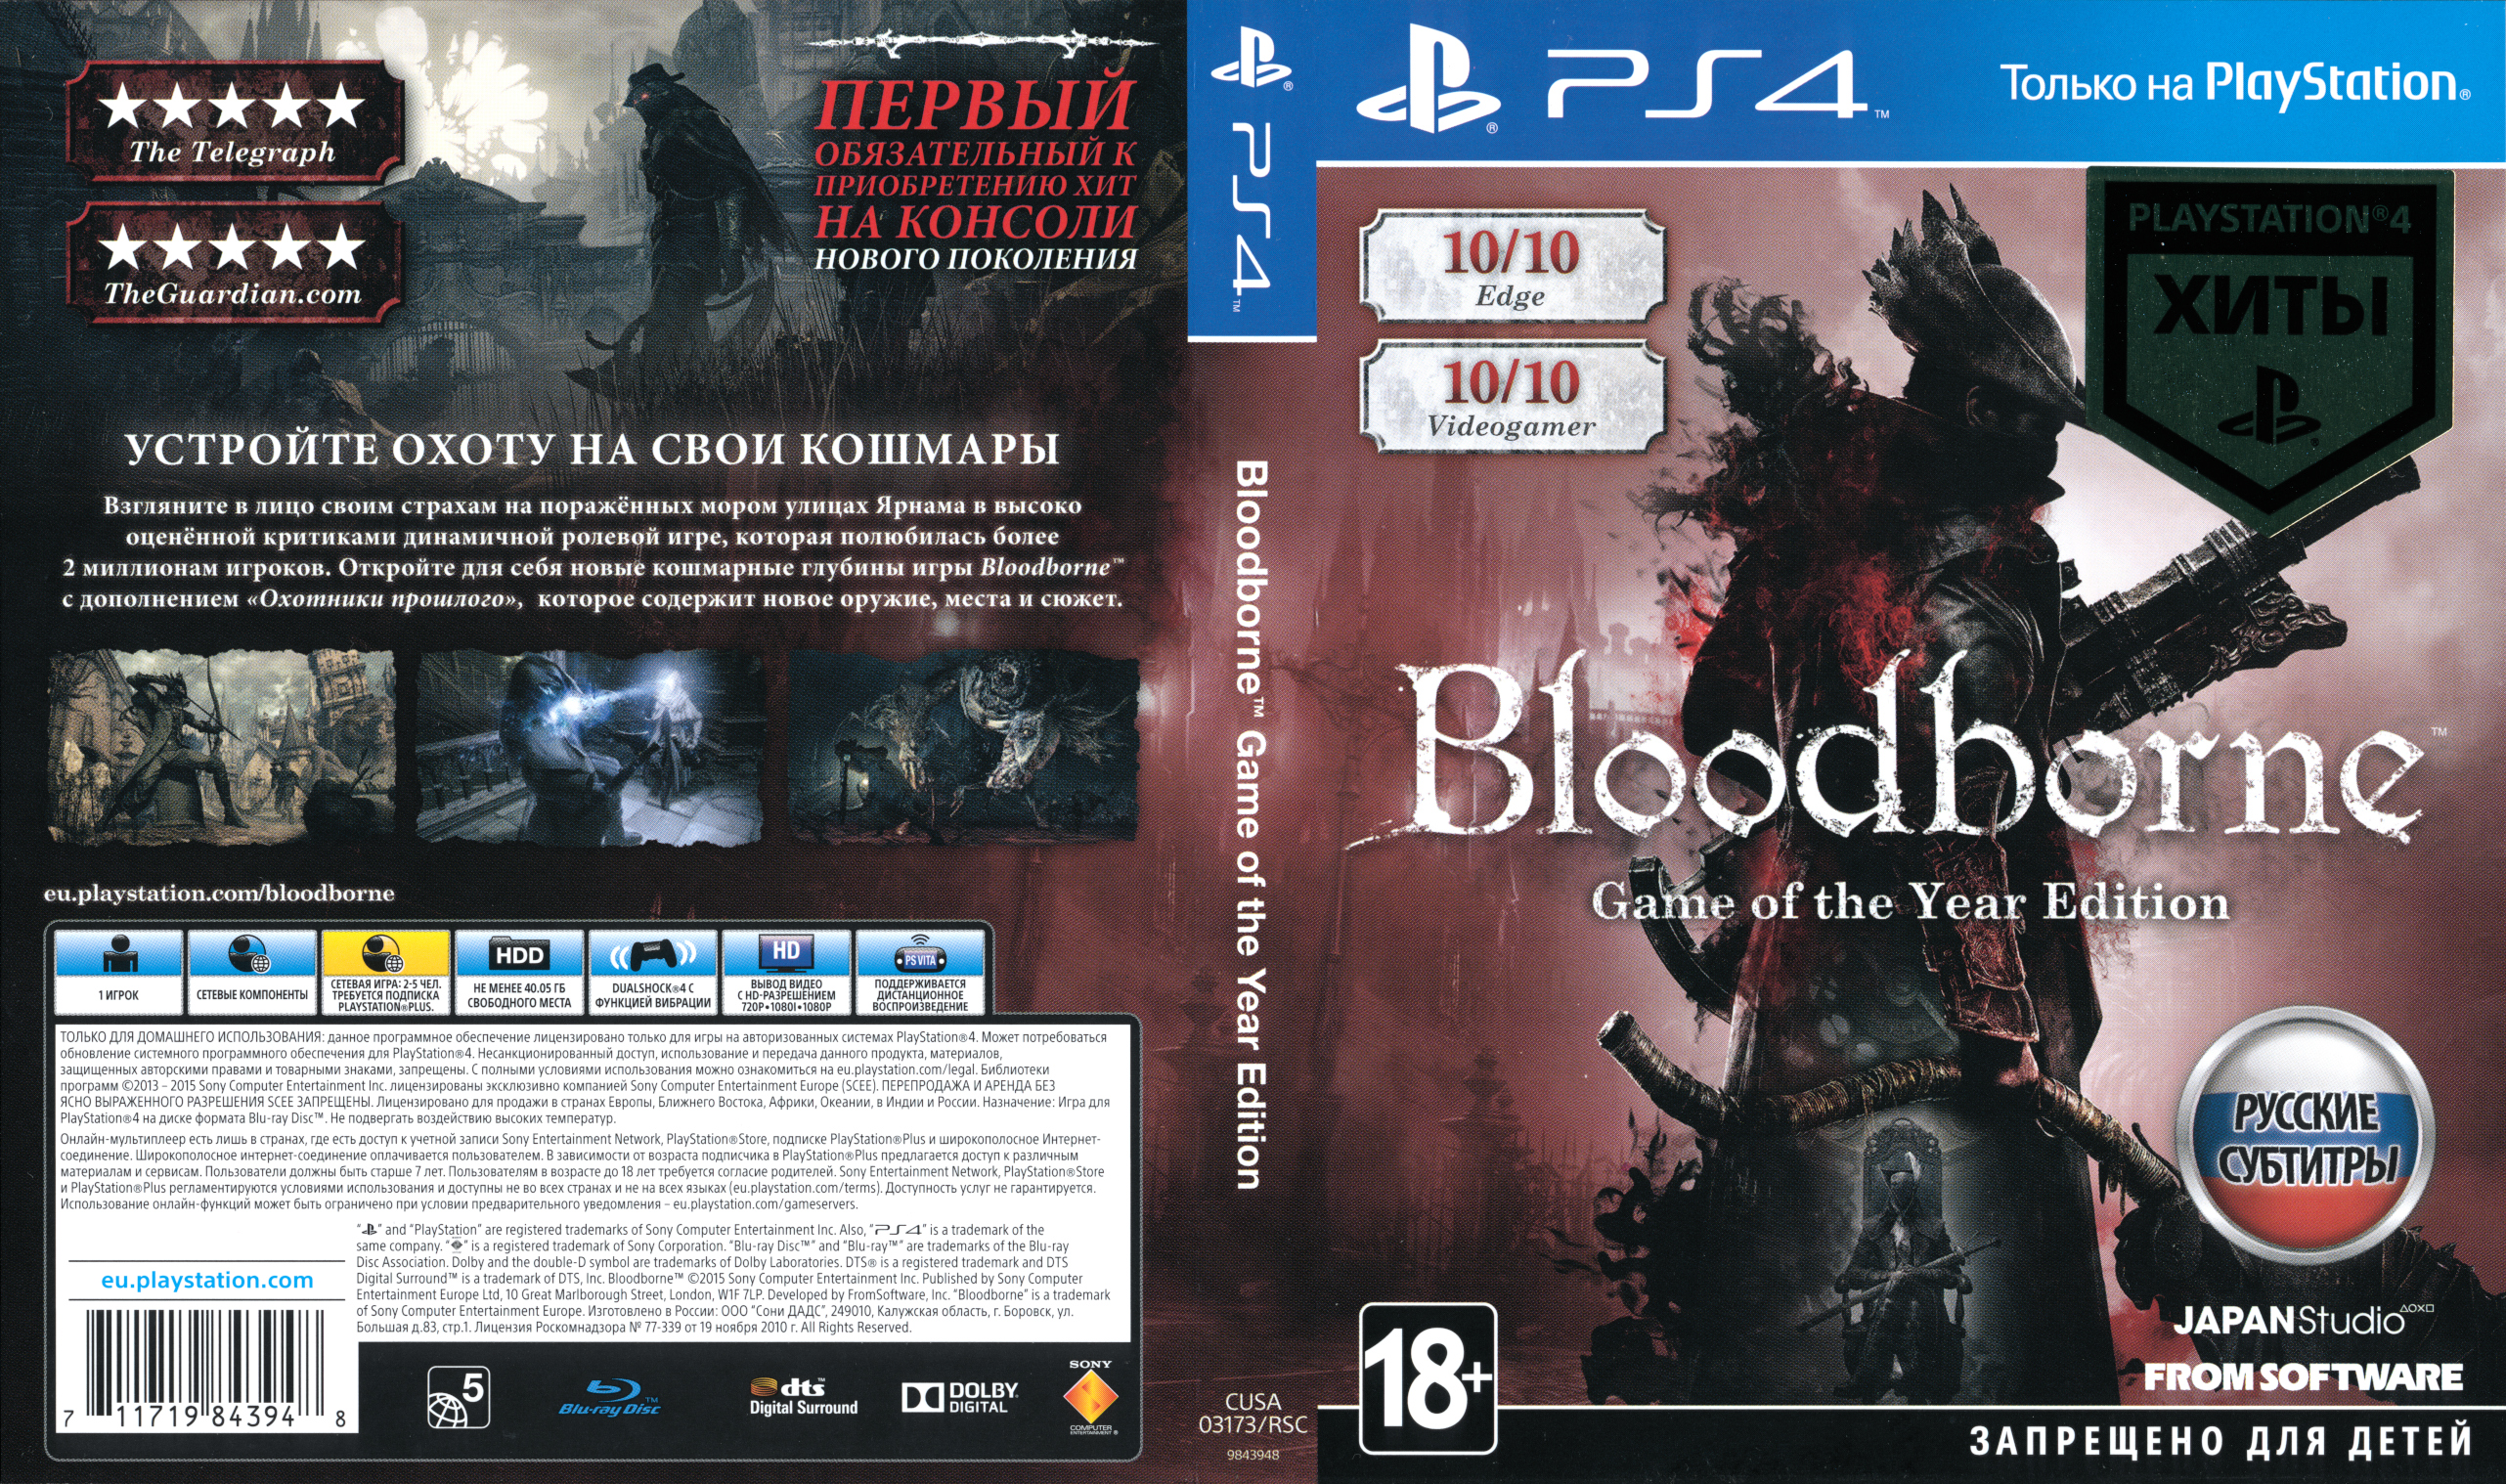  Bloodborne - Game of the Year (PS4) : Video Games